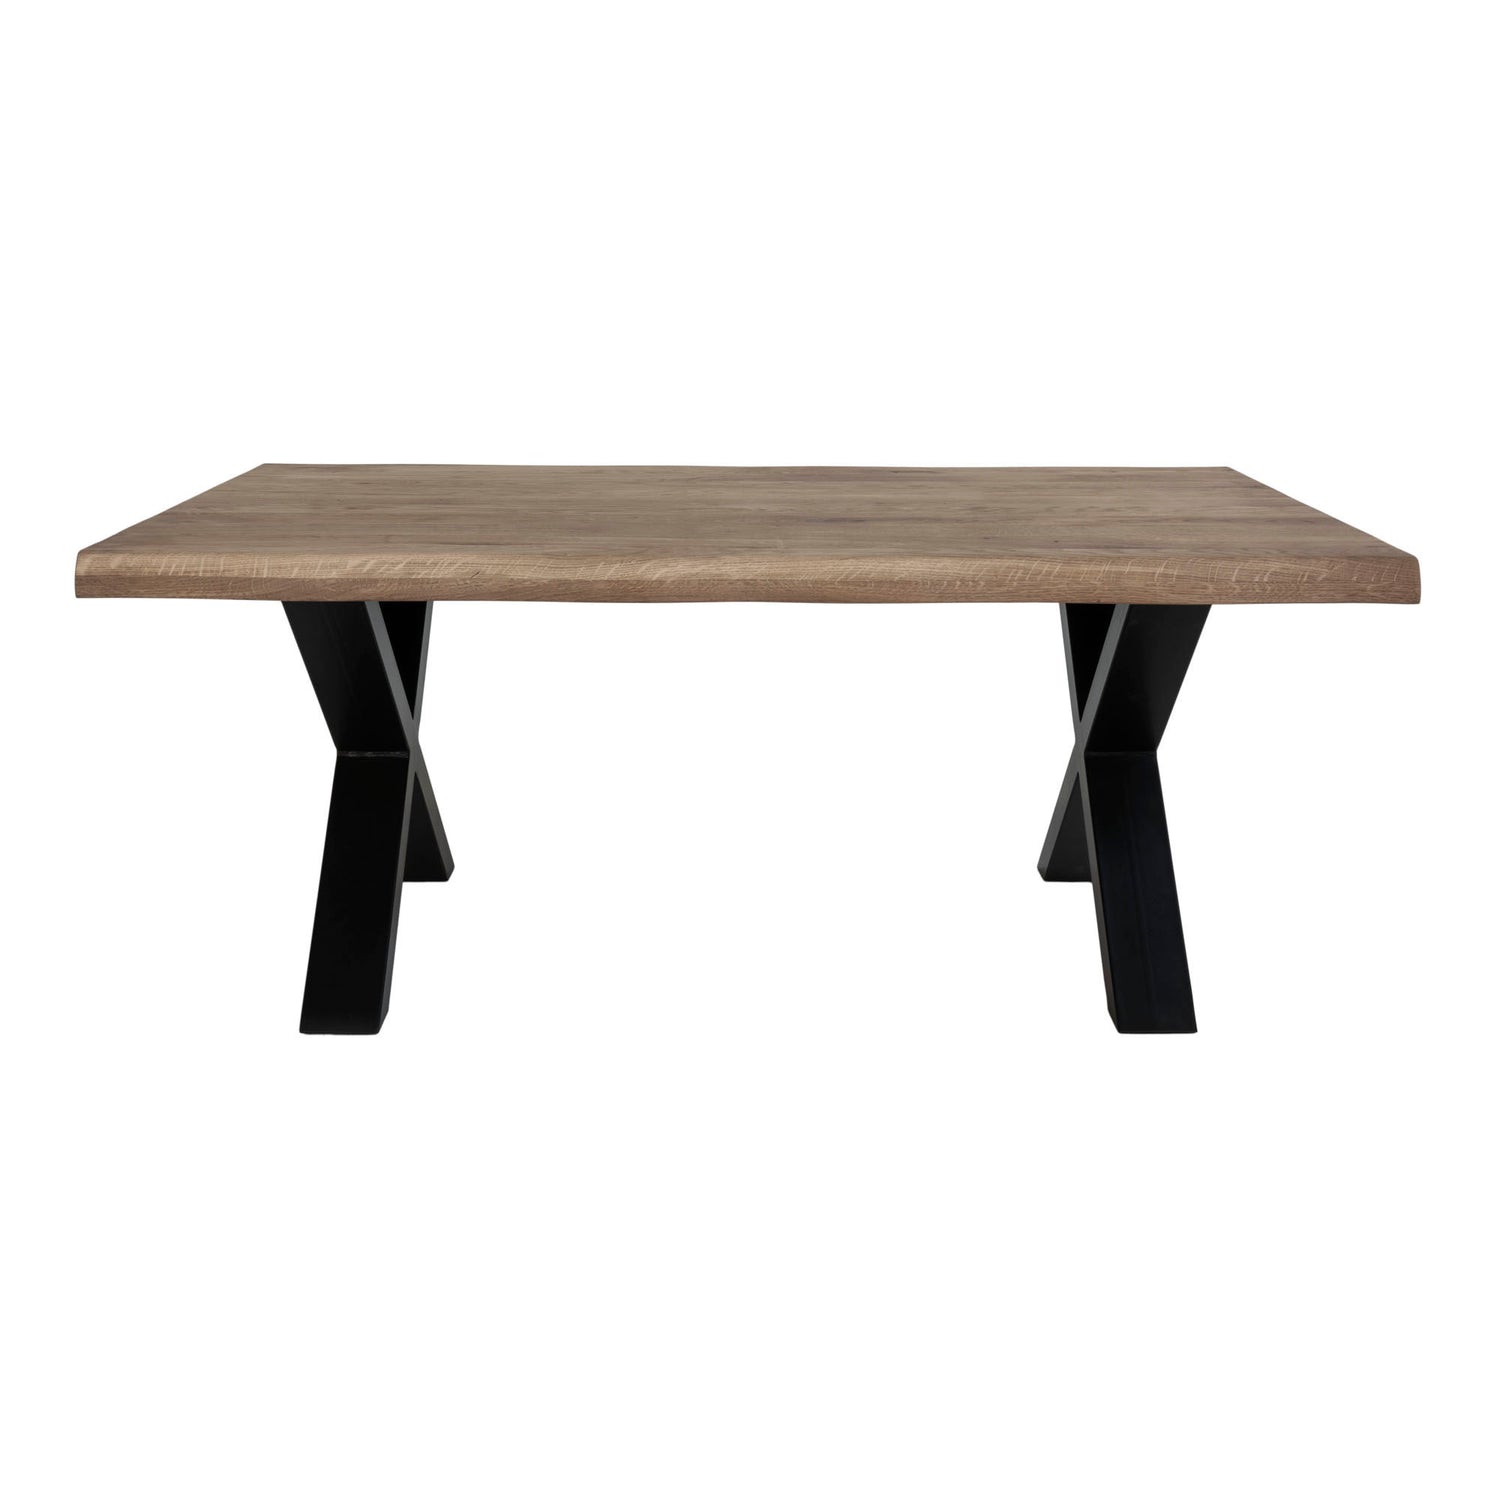 House Nordic - Toulon coffee table